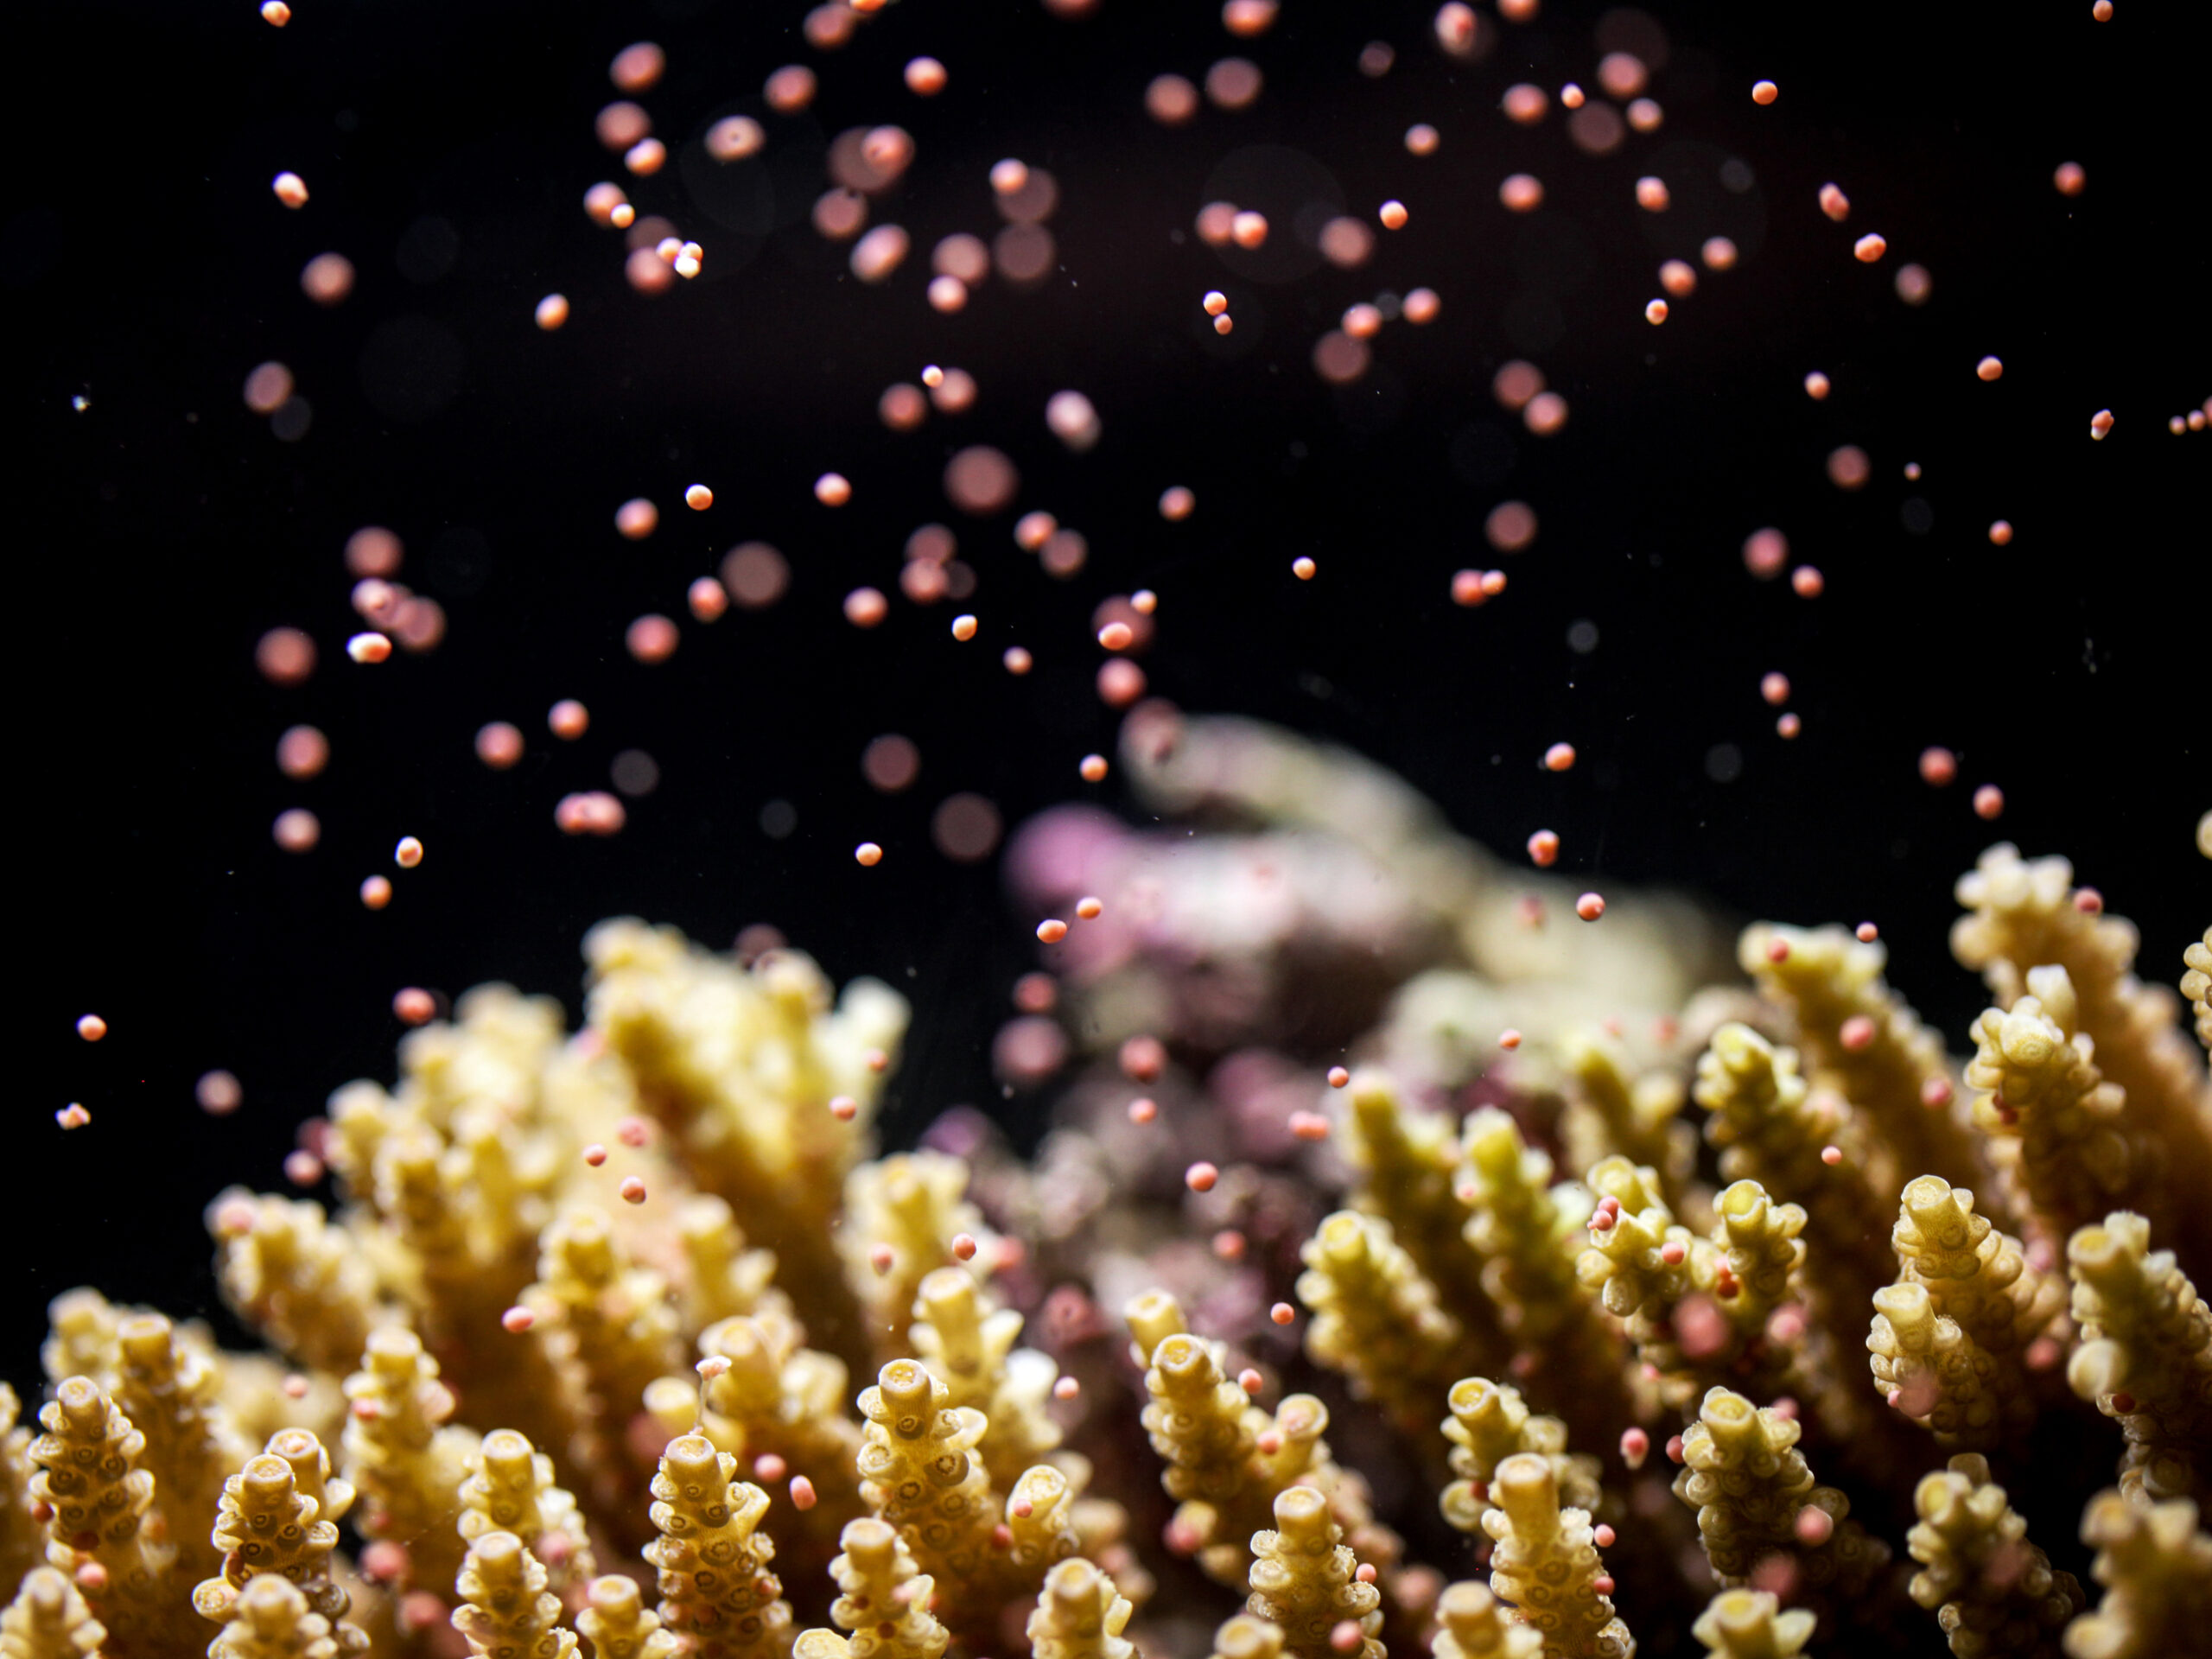 During spawning corals release their eggs and sperm, filling the water like confetti, which combine to create the next generation of reef builders.